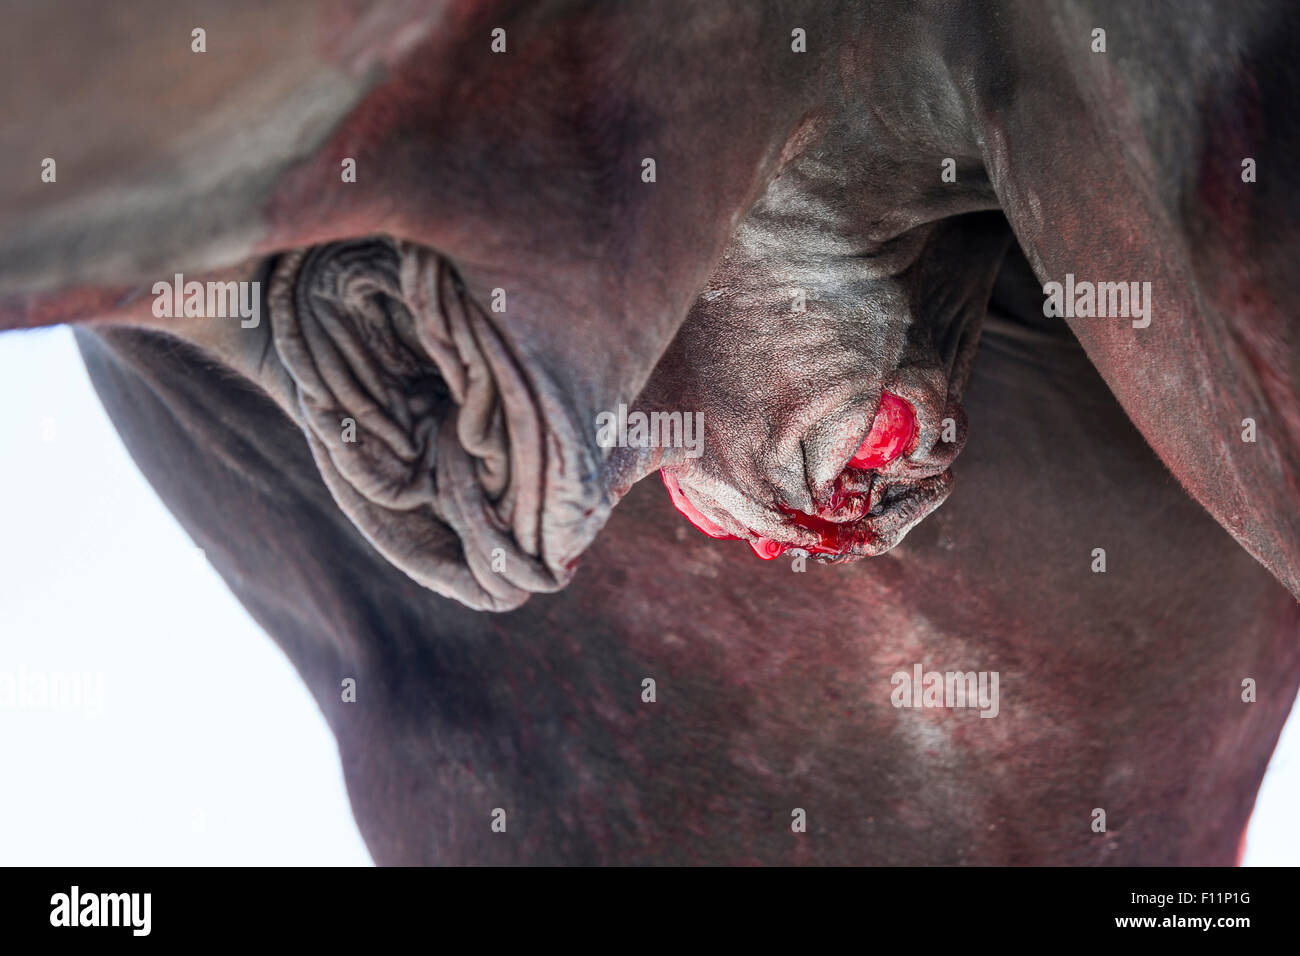 Domestic horse Wound after surgical castration Stock Photo